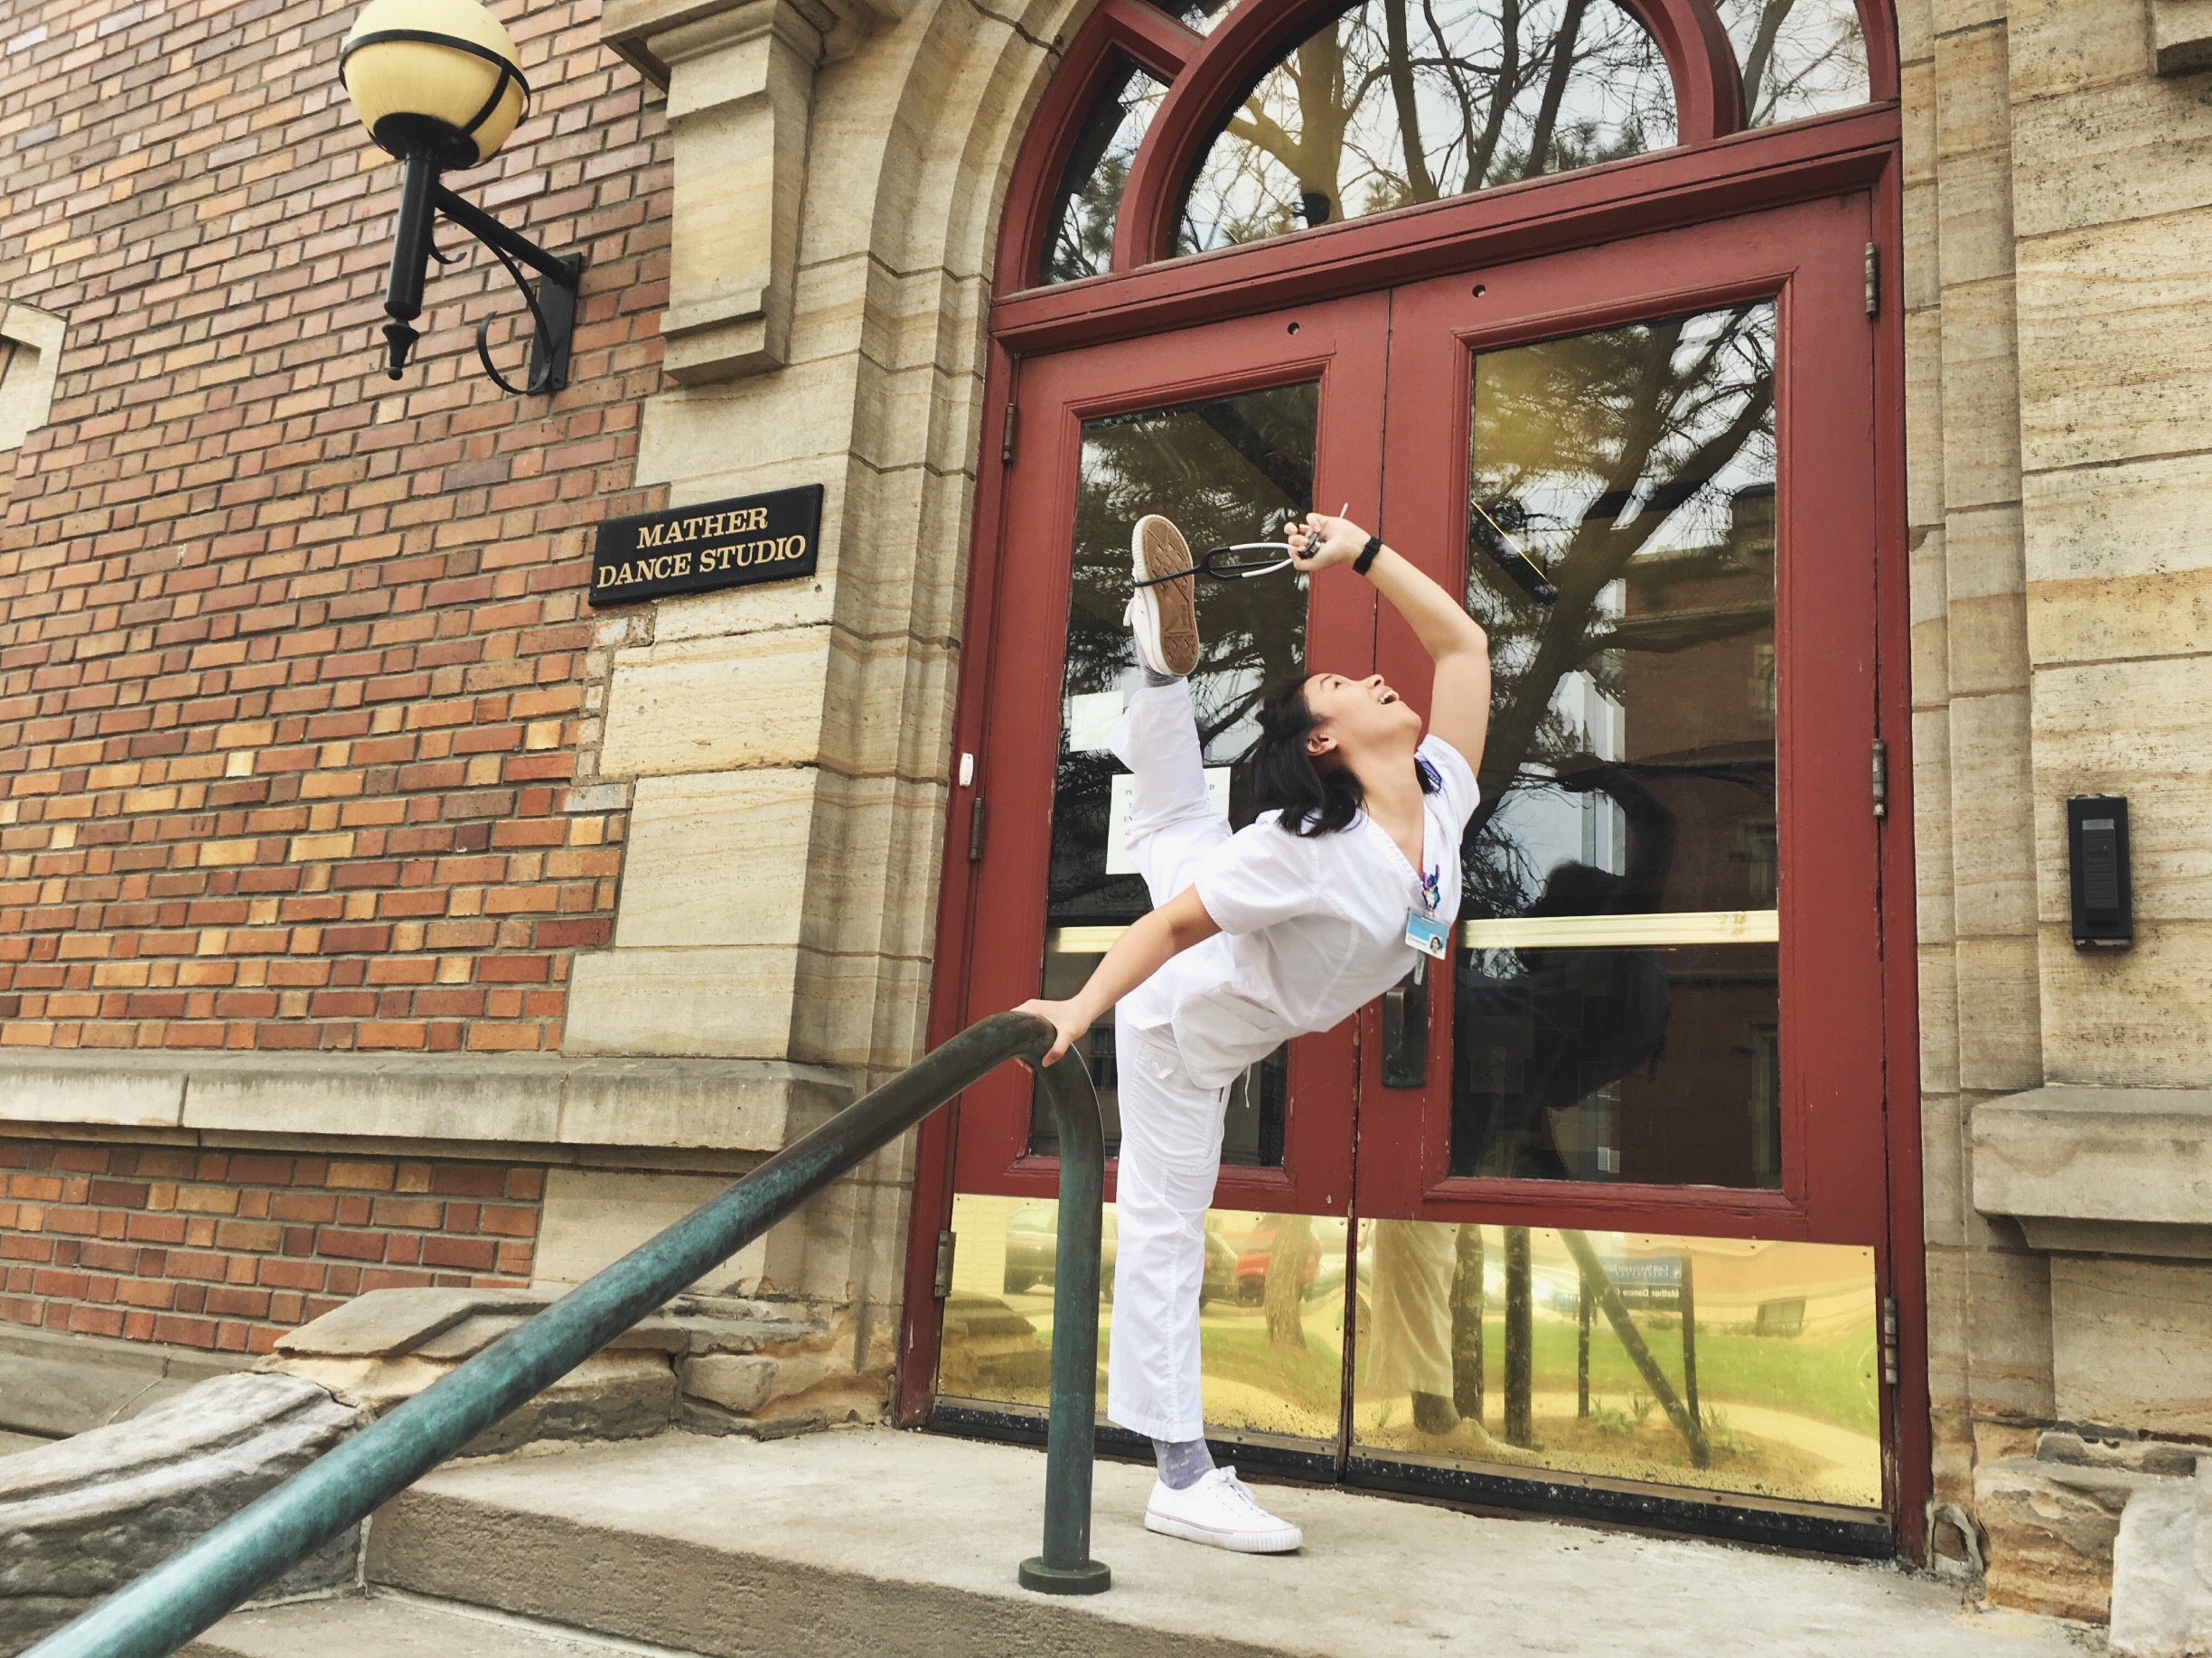 Sabrina Santander, nursing and dance double major, pictured with her stethoscope outside Mather Dance Center.